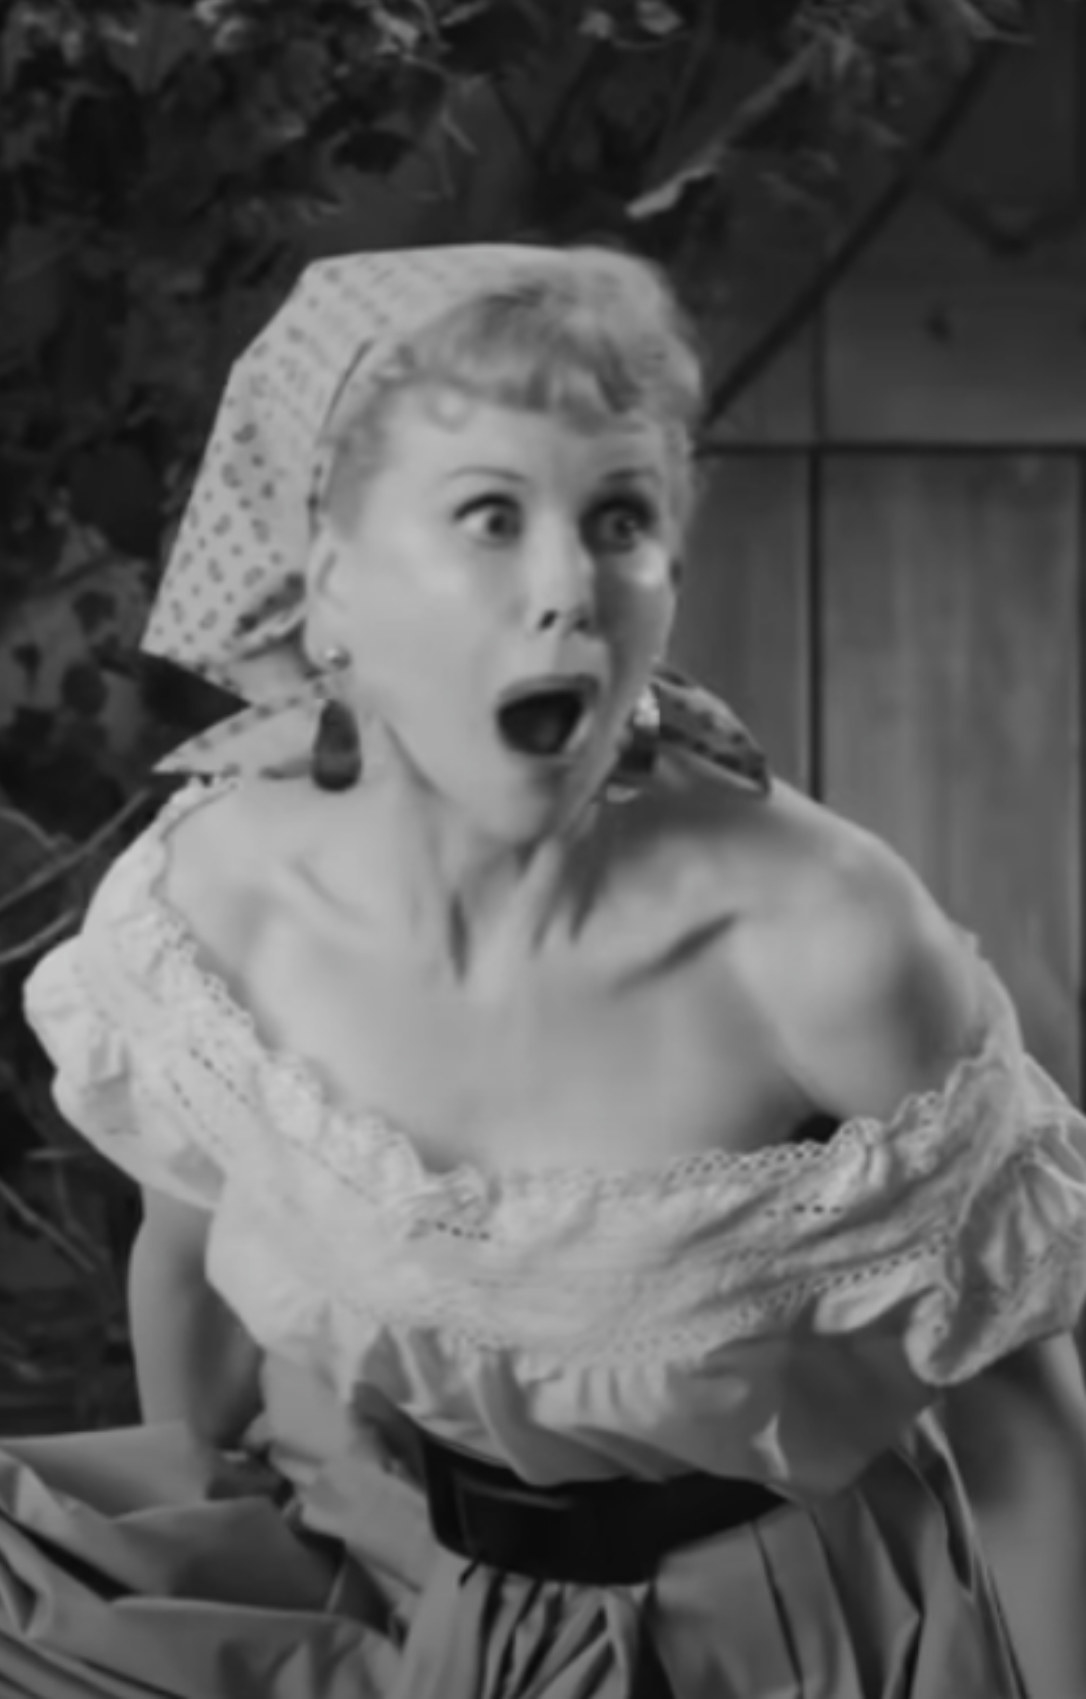 Kidman making a shocked, classic Lucille Ball face while stomping grapes